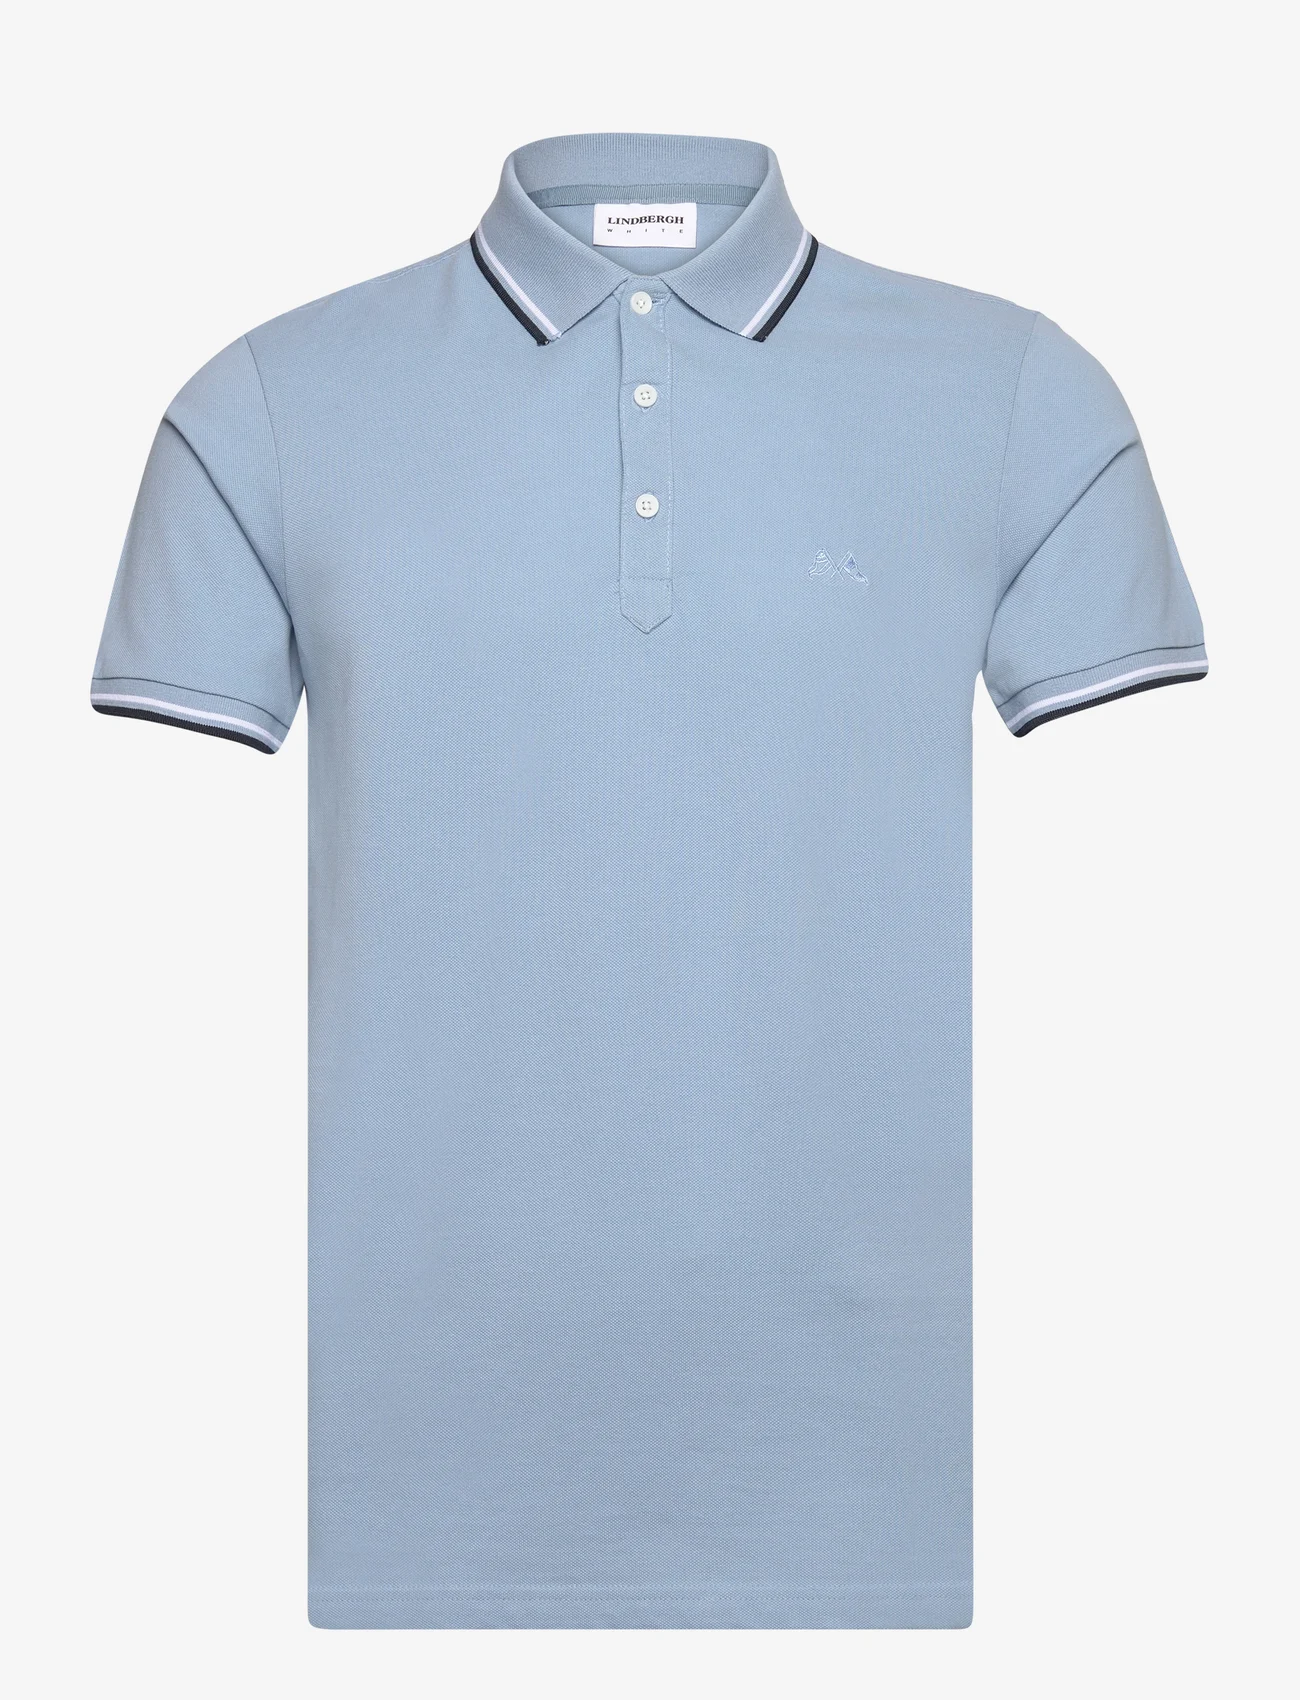 Lindbergh - Polo shirt with contrast piping - lowest prices - lt blue 124 - 0